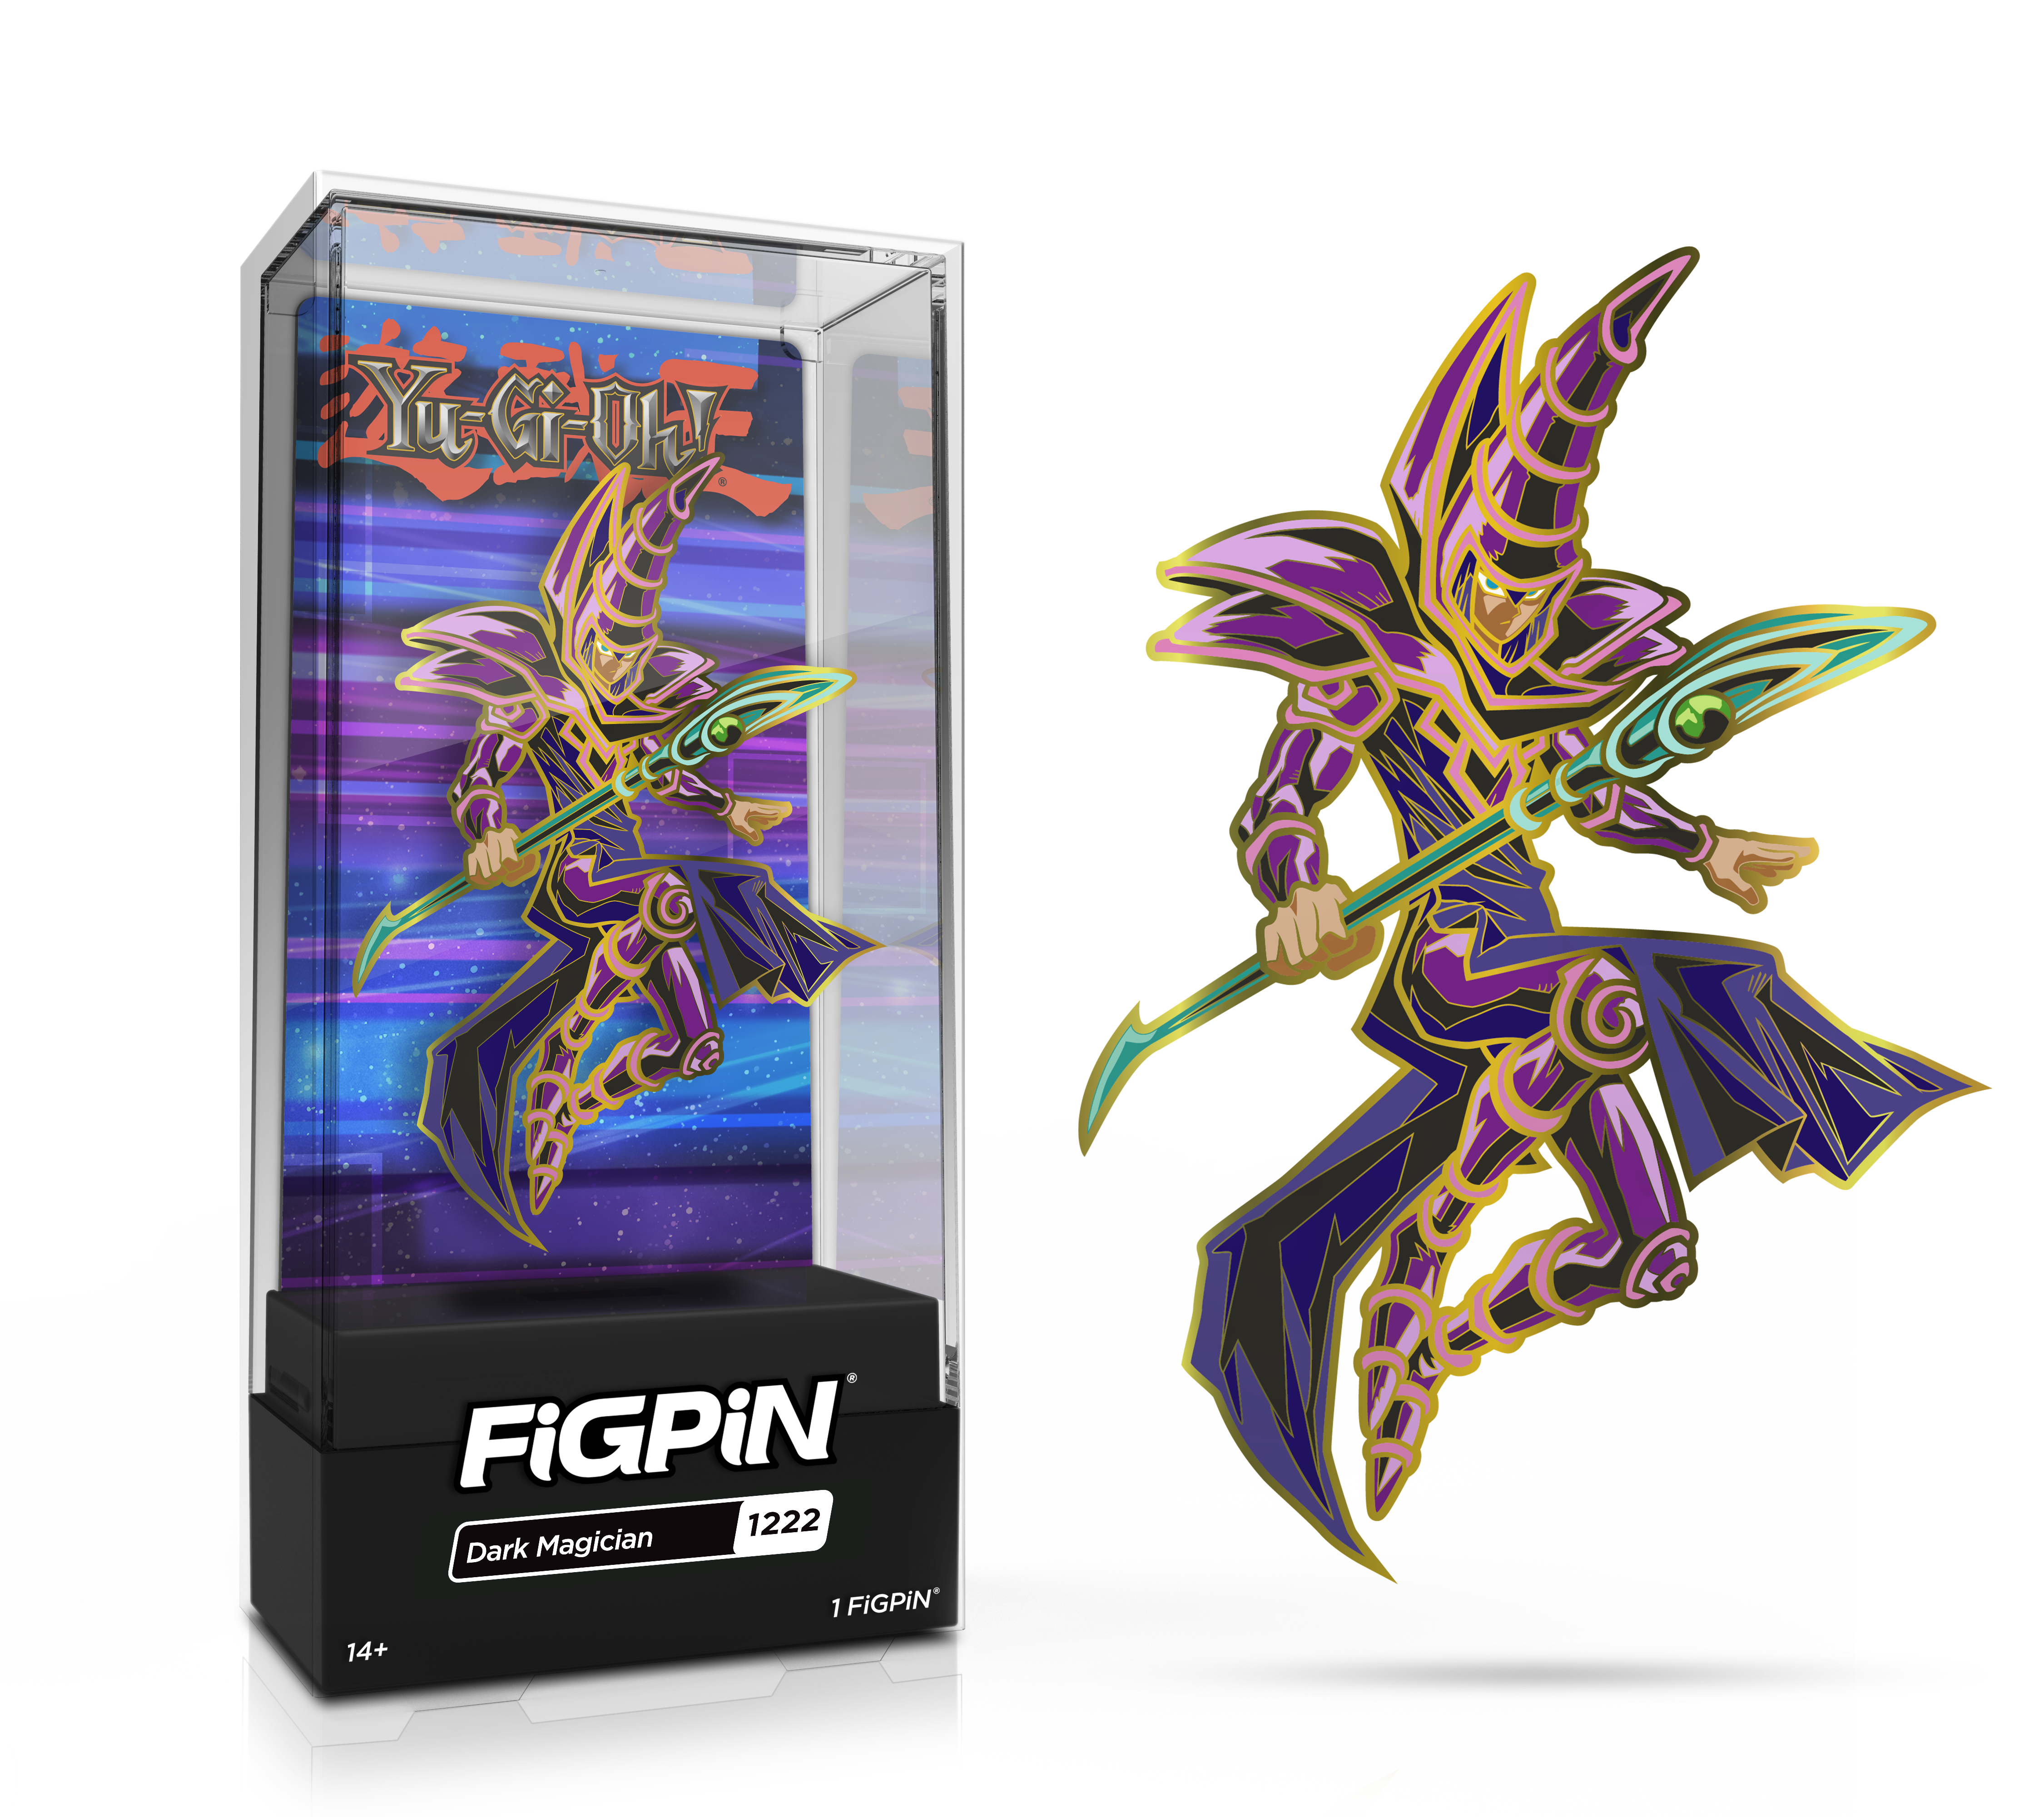 Side by side view of the Dark Magician enamel pin in display case and the art render.